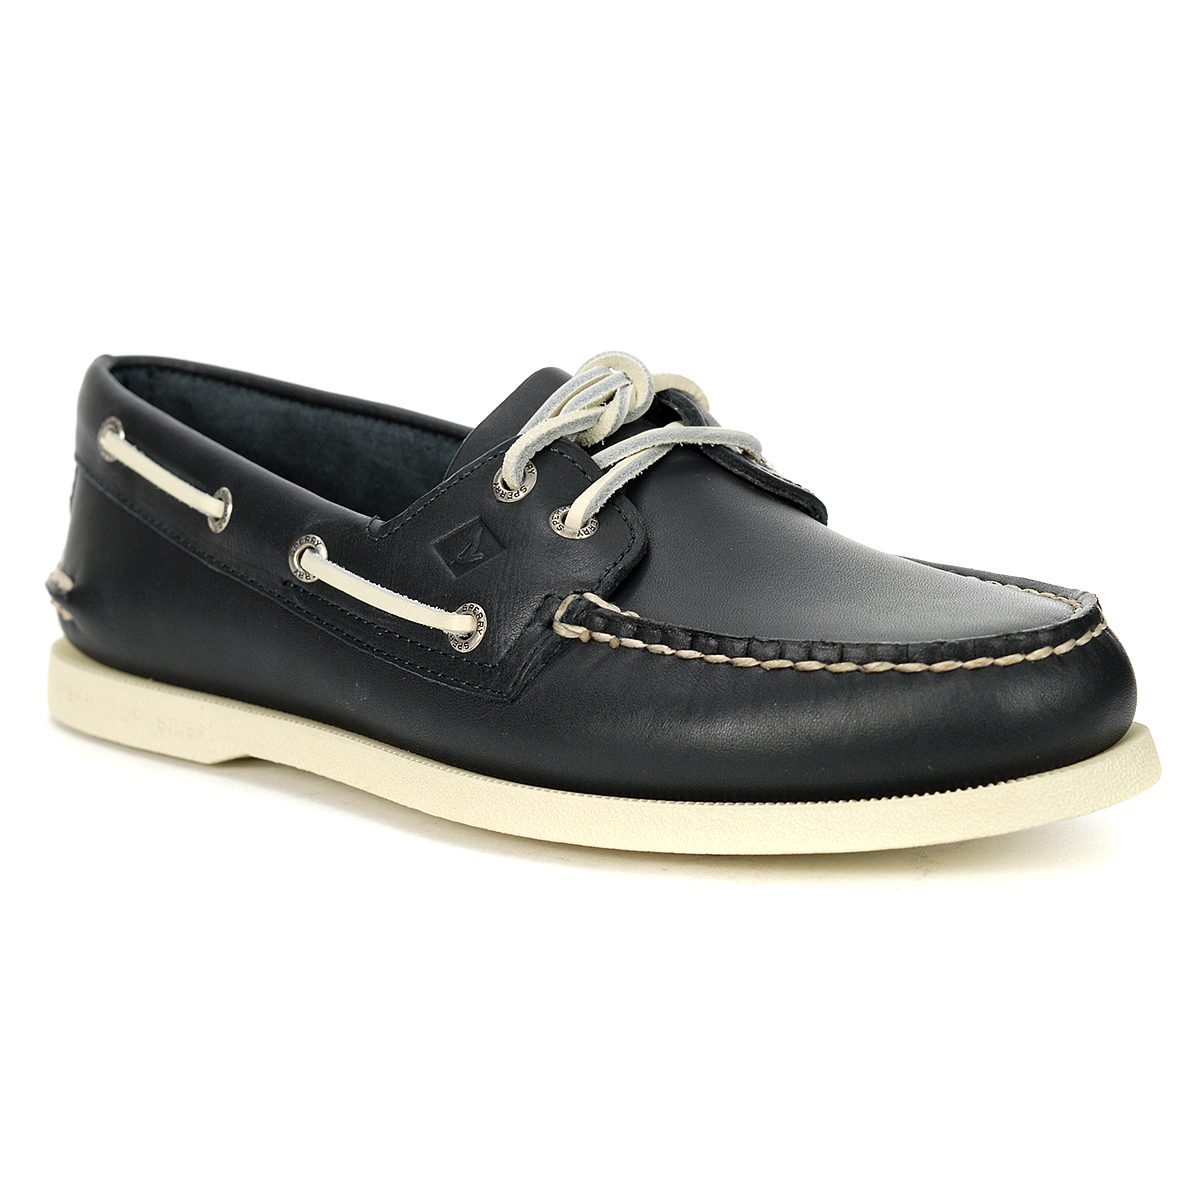 Sperry Top-Sider Men's Authentic Original Leather Boat Shoe Navy ...